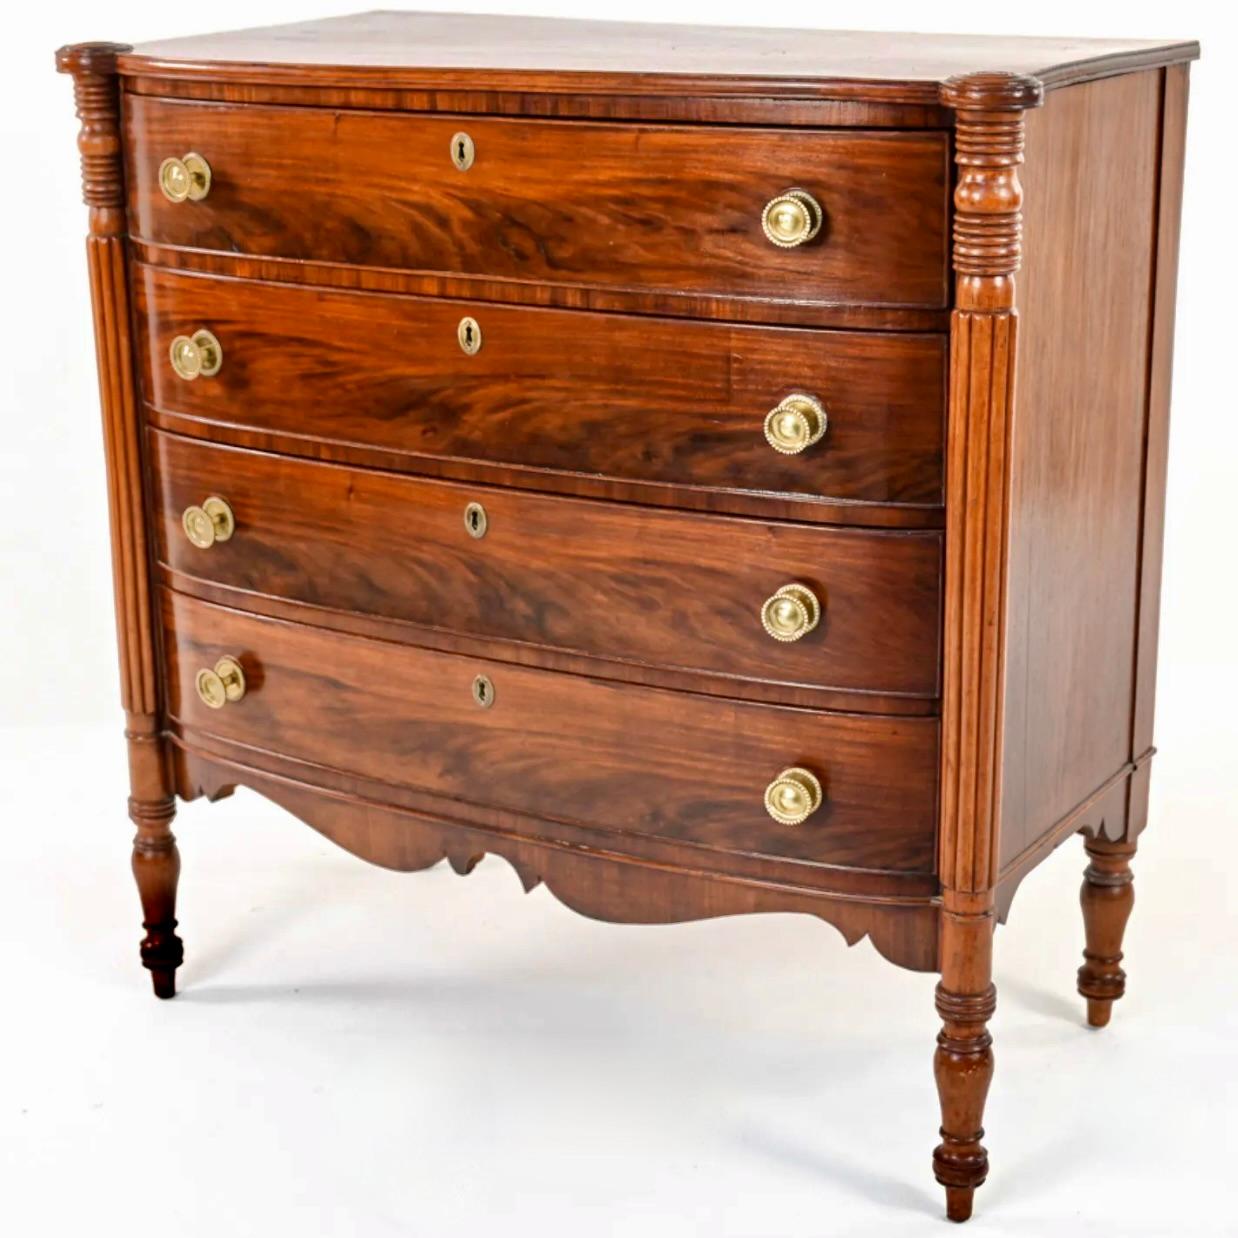 A very fine example of a Boston area Sheraton mahogany chest of drawers, with turret corners and reeded stiles on tall legs, giving the piece a sporty and well proportioned look. In gorgeous condition, the top is a single board of figured mahogany